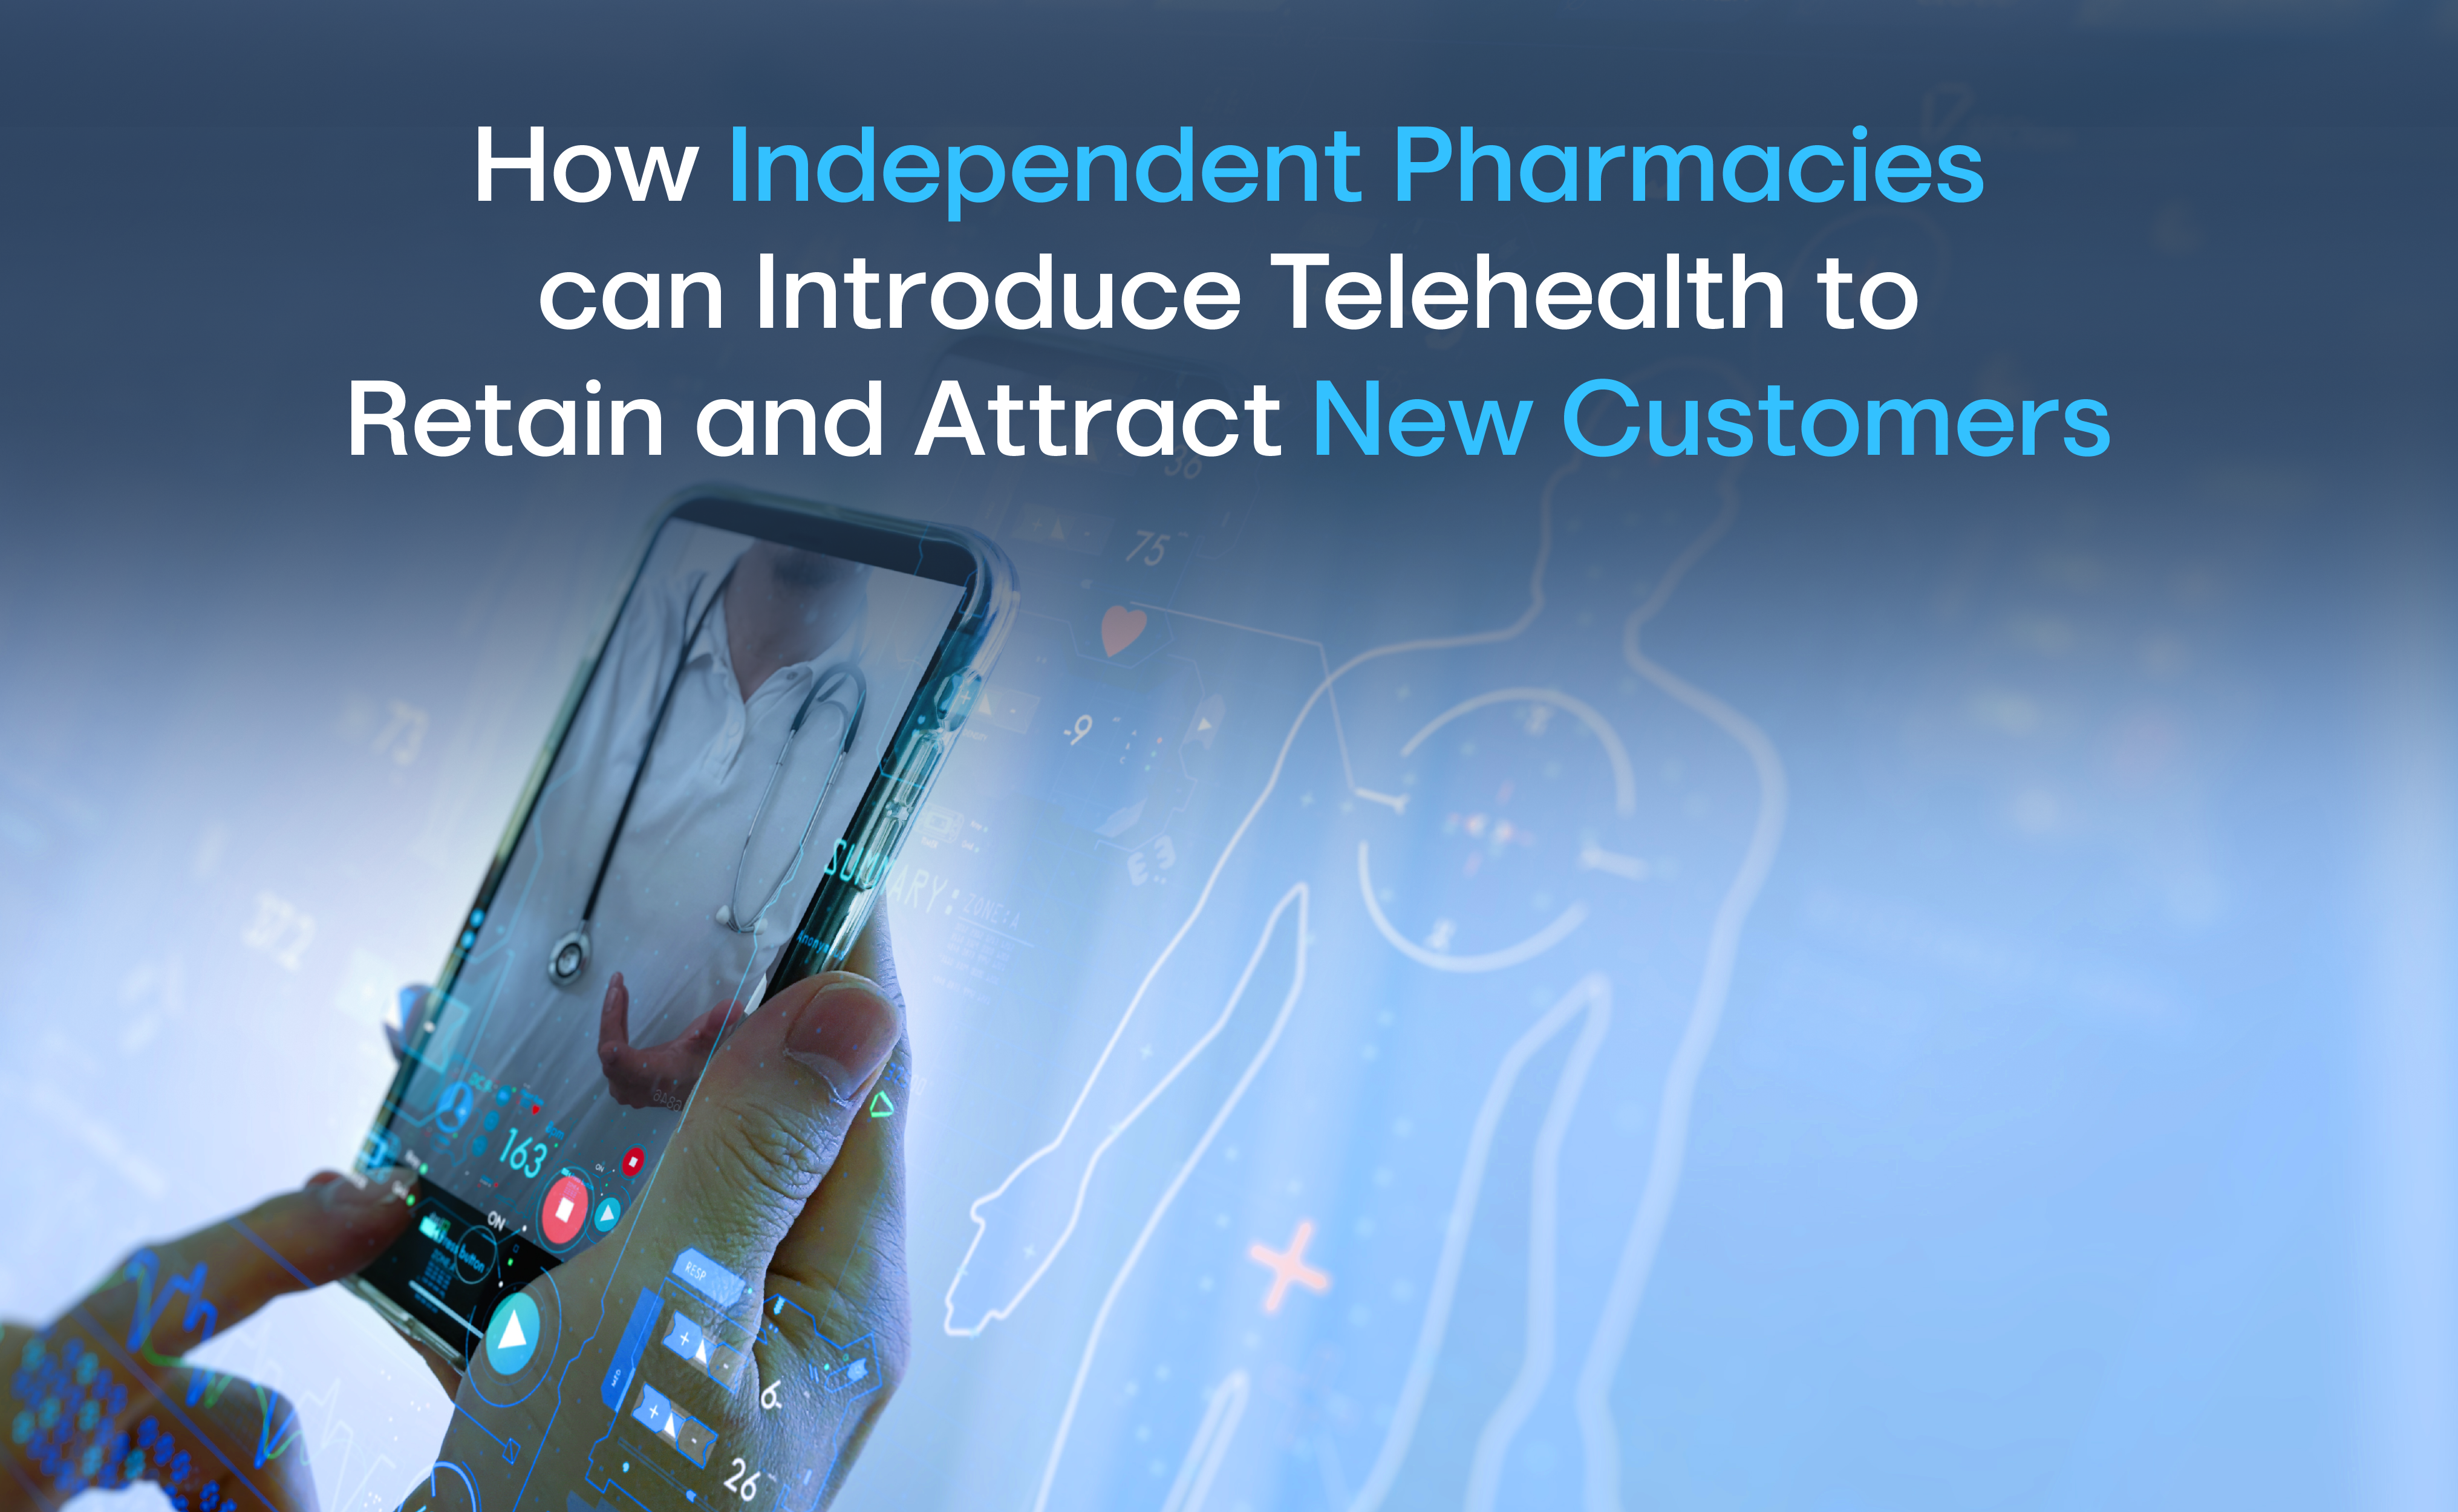 How Independent Pharmacies Can Introduce Telehealth to Retain and Attract New Customers